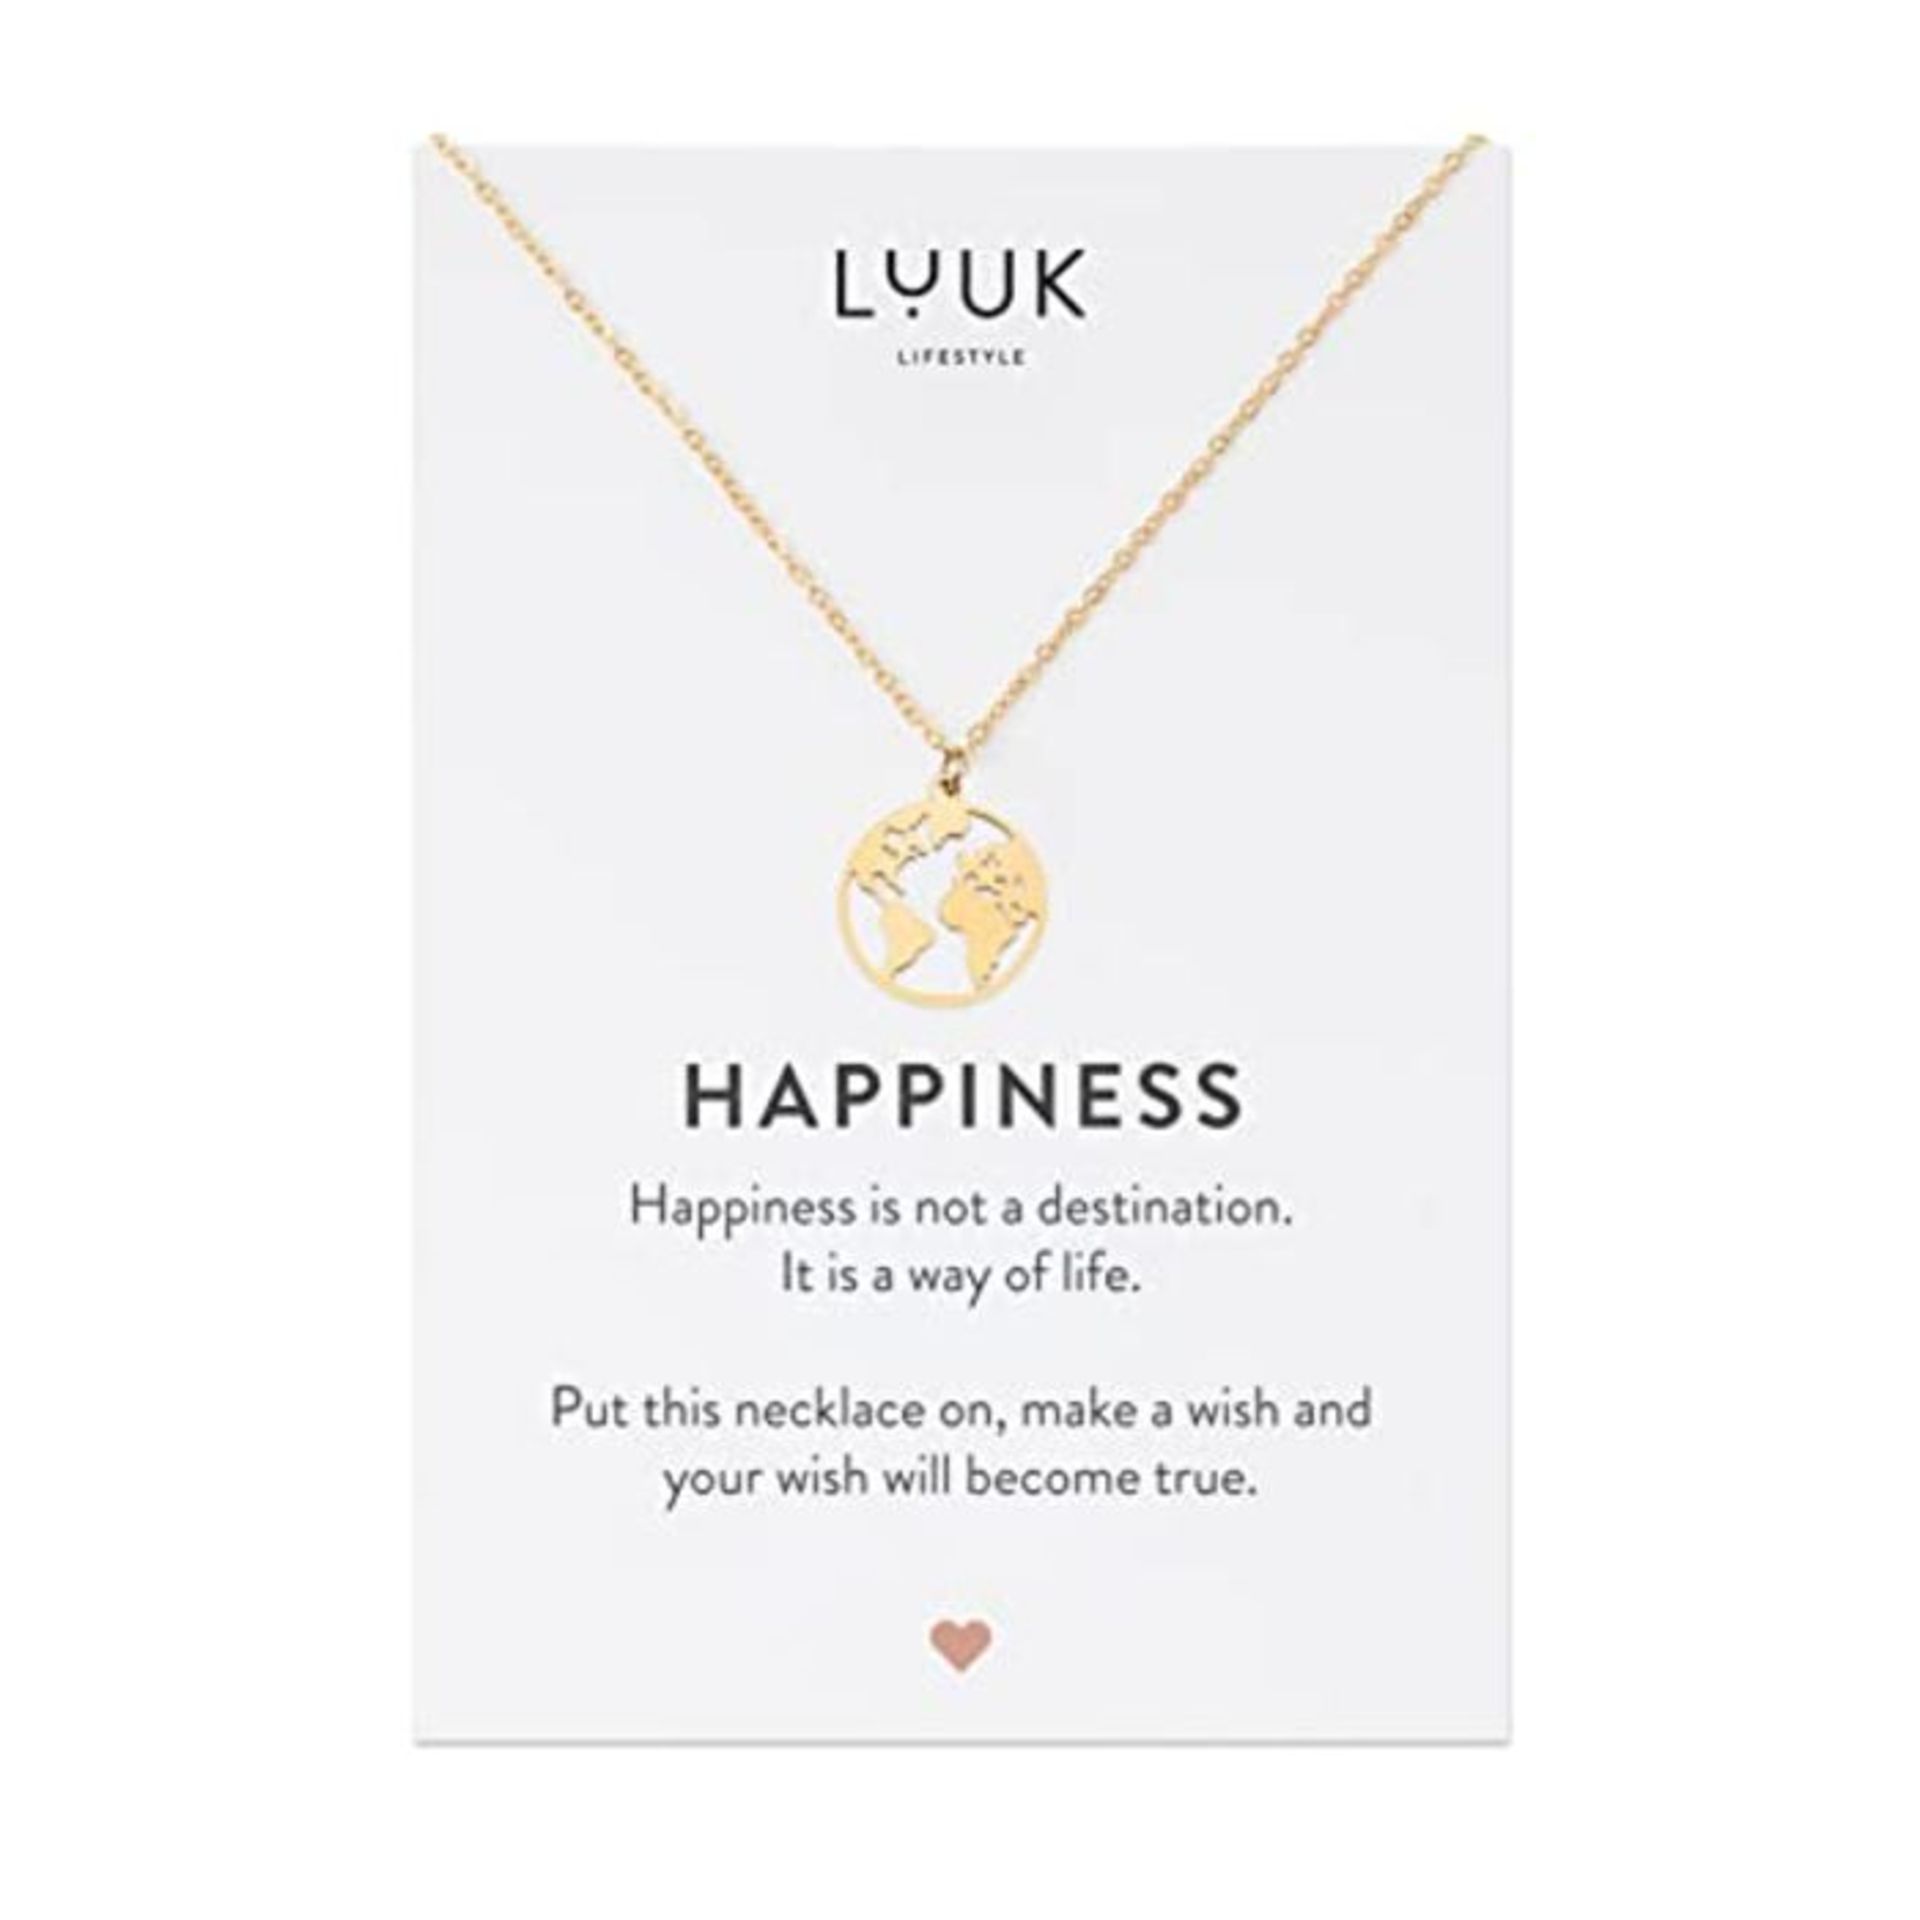 [CRACKED] LUUK LIFESTYLE Stainless steel necklace with worldmap pendant and card with